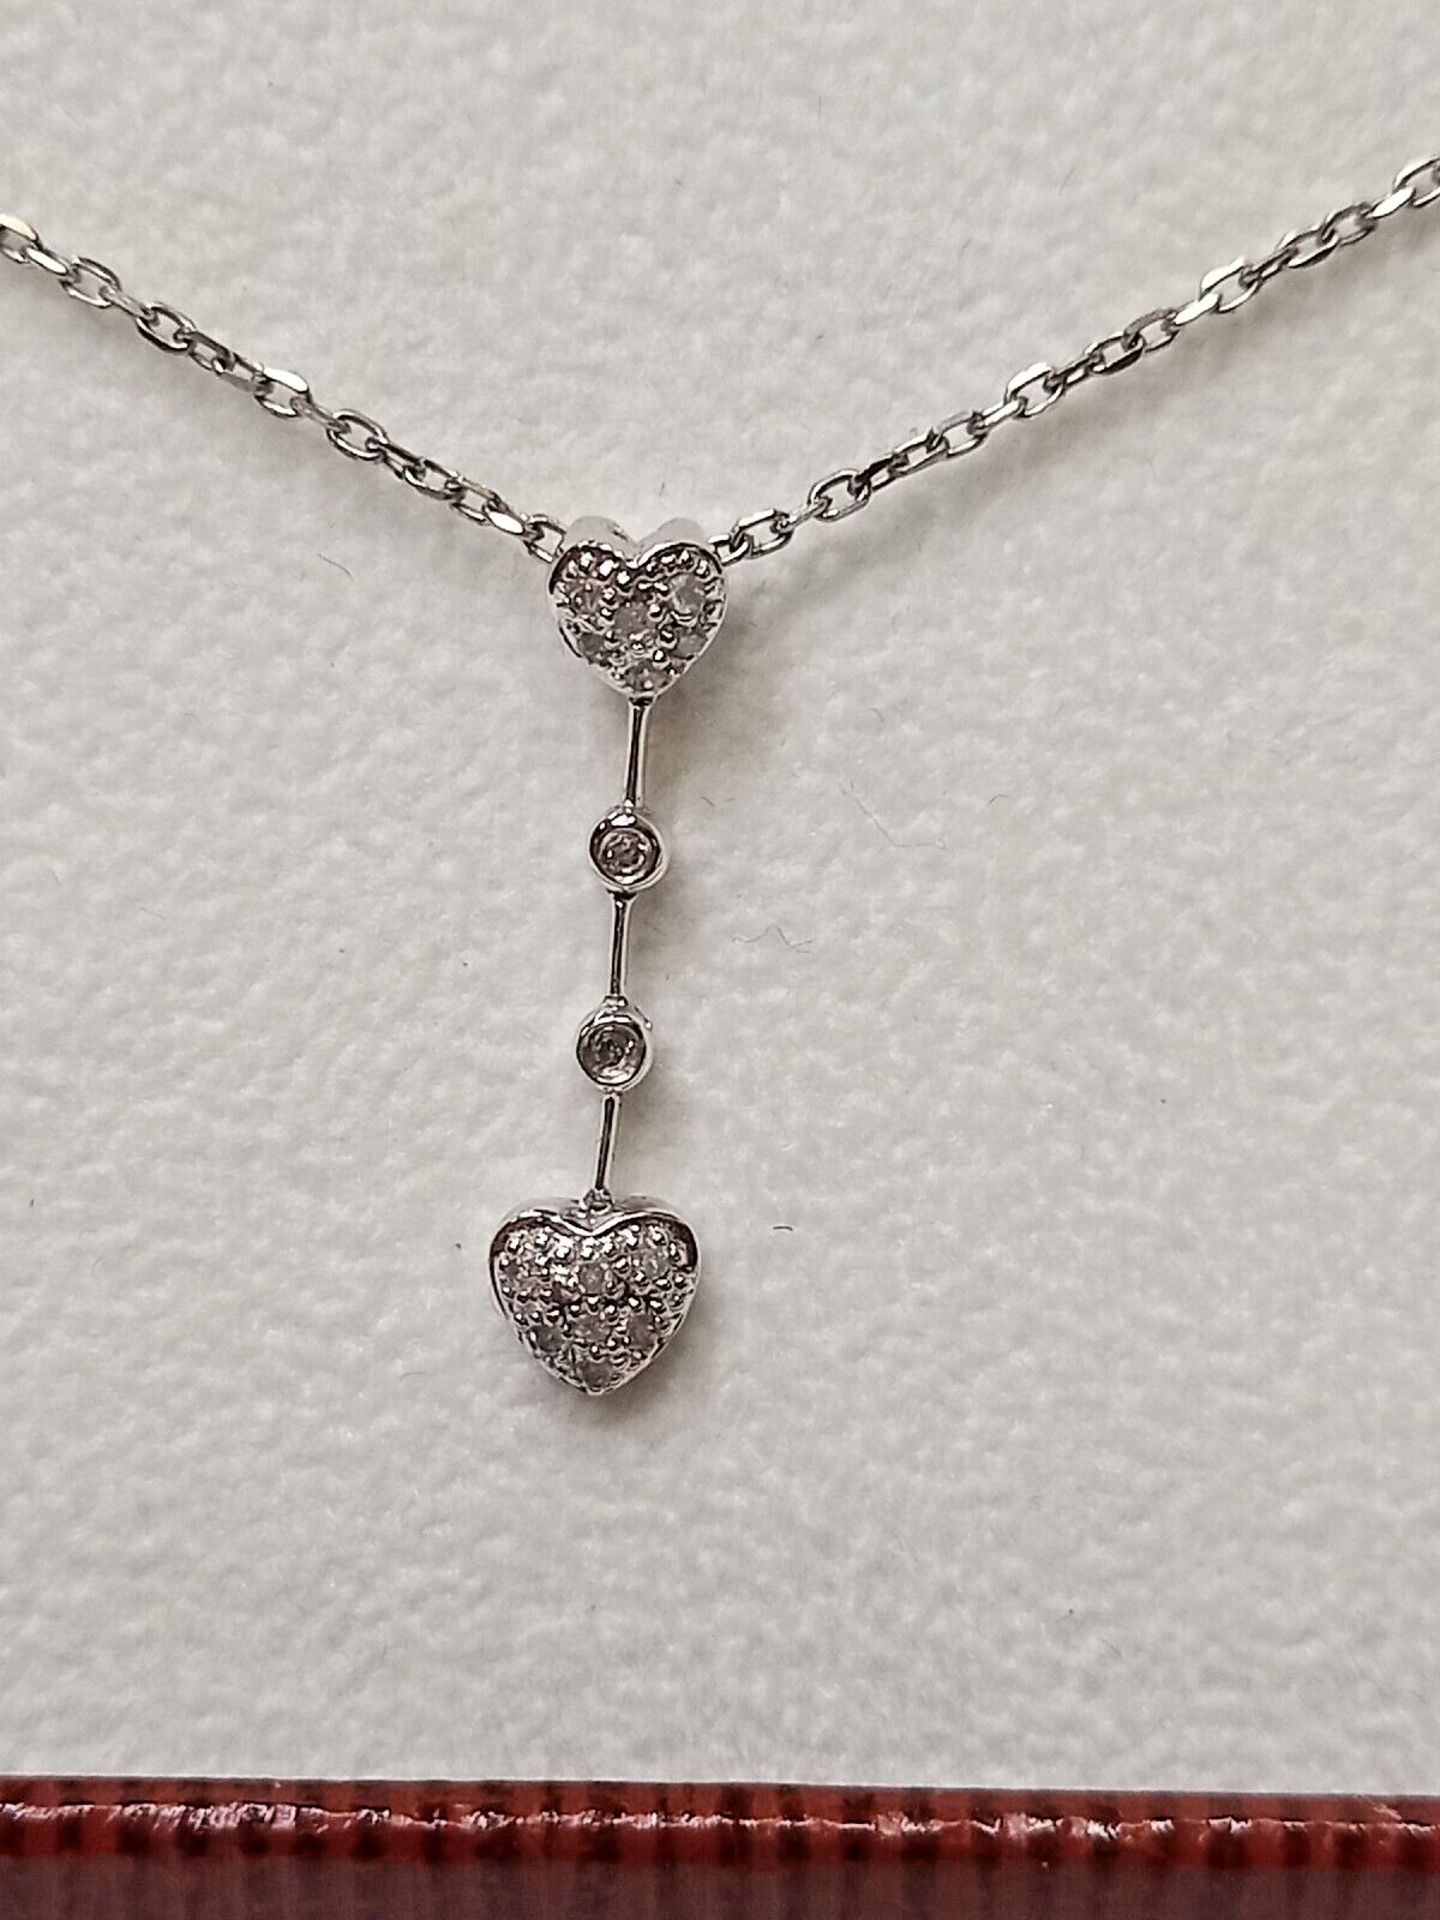 0.24CT DIAMOND HEART SHAPED PENDANT/9CT WHITE GOLD IN GIFT BOX WITH VALUATION CERTIFICATE OF £850 - Image 2 of 4